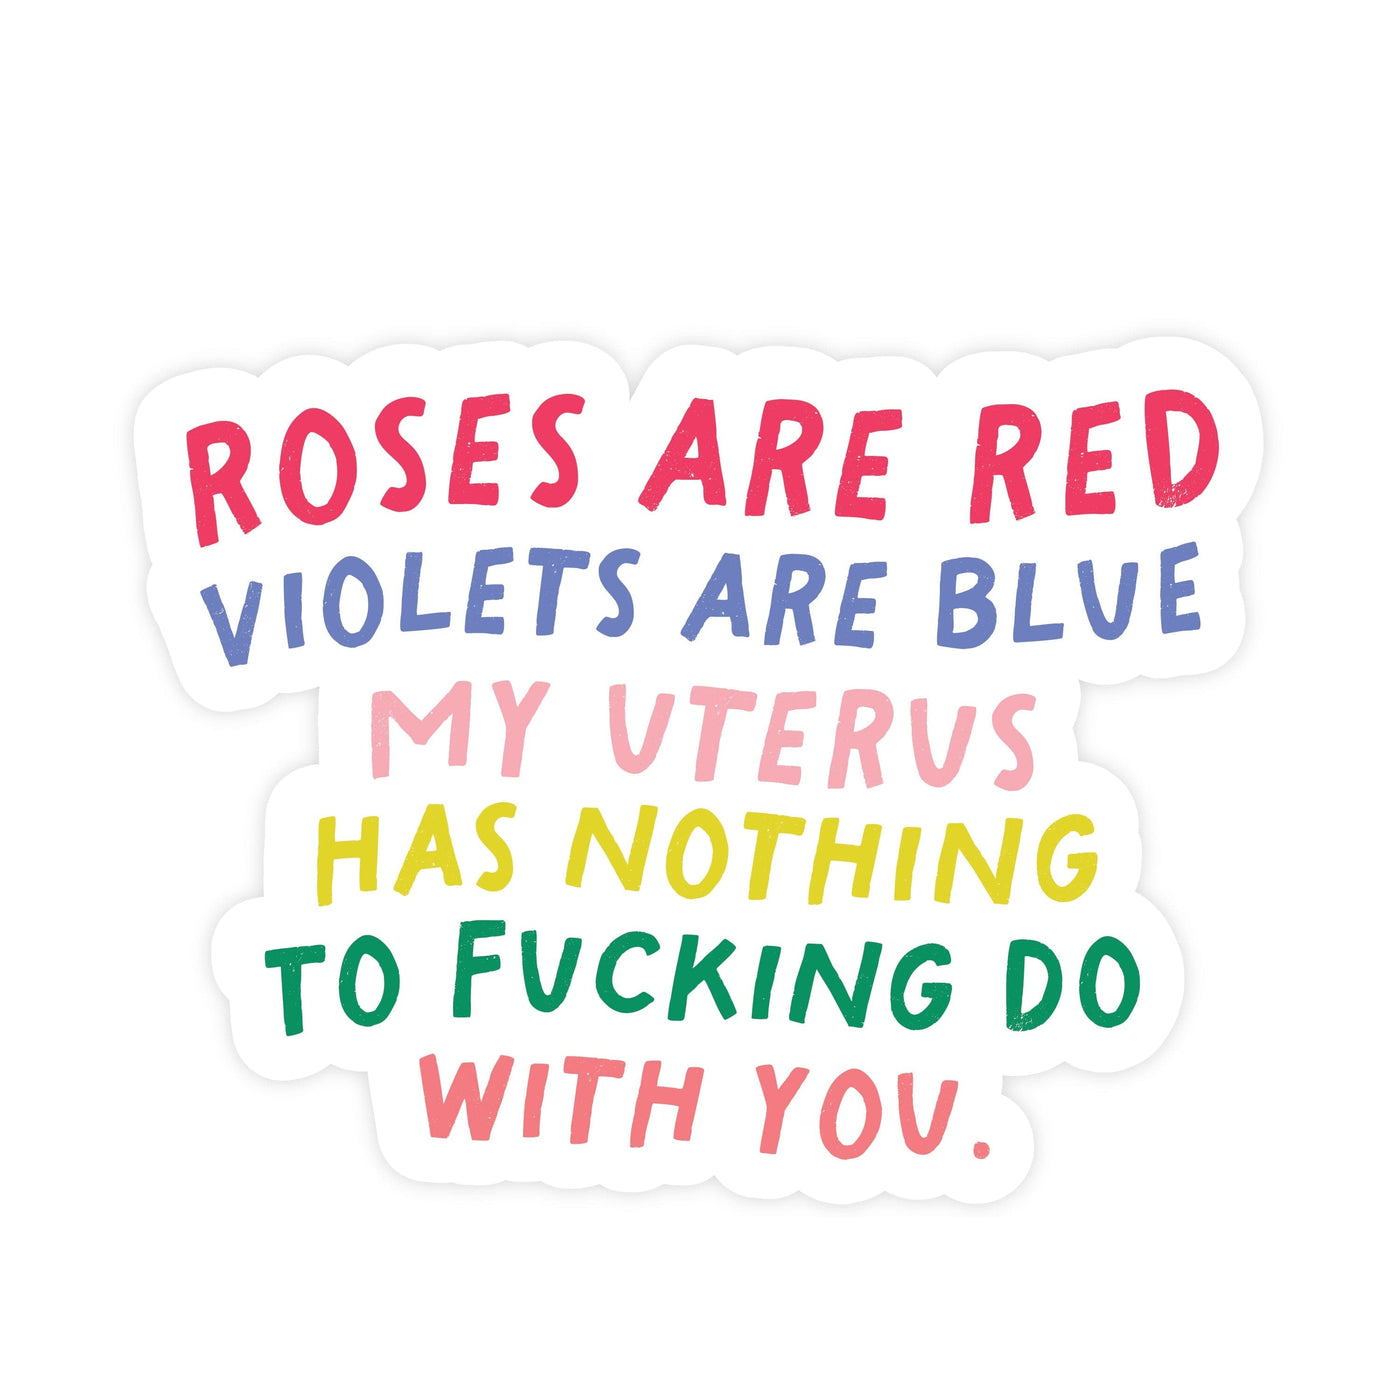 My Uterus Has Nothing To Fucking Do With You | Sticker - The Local Space